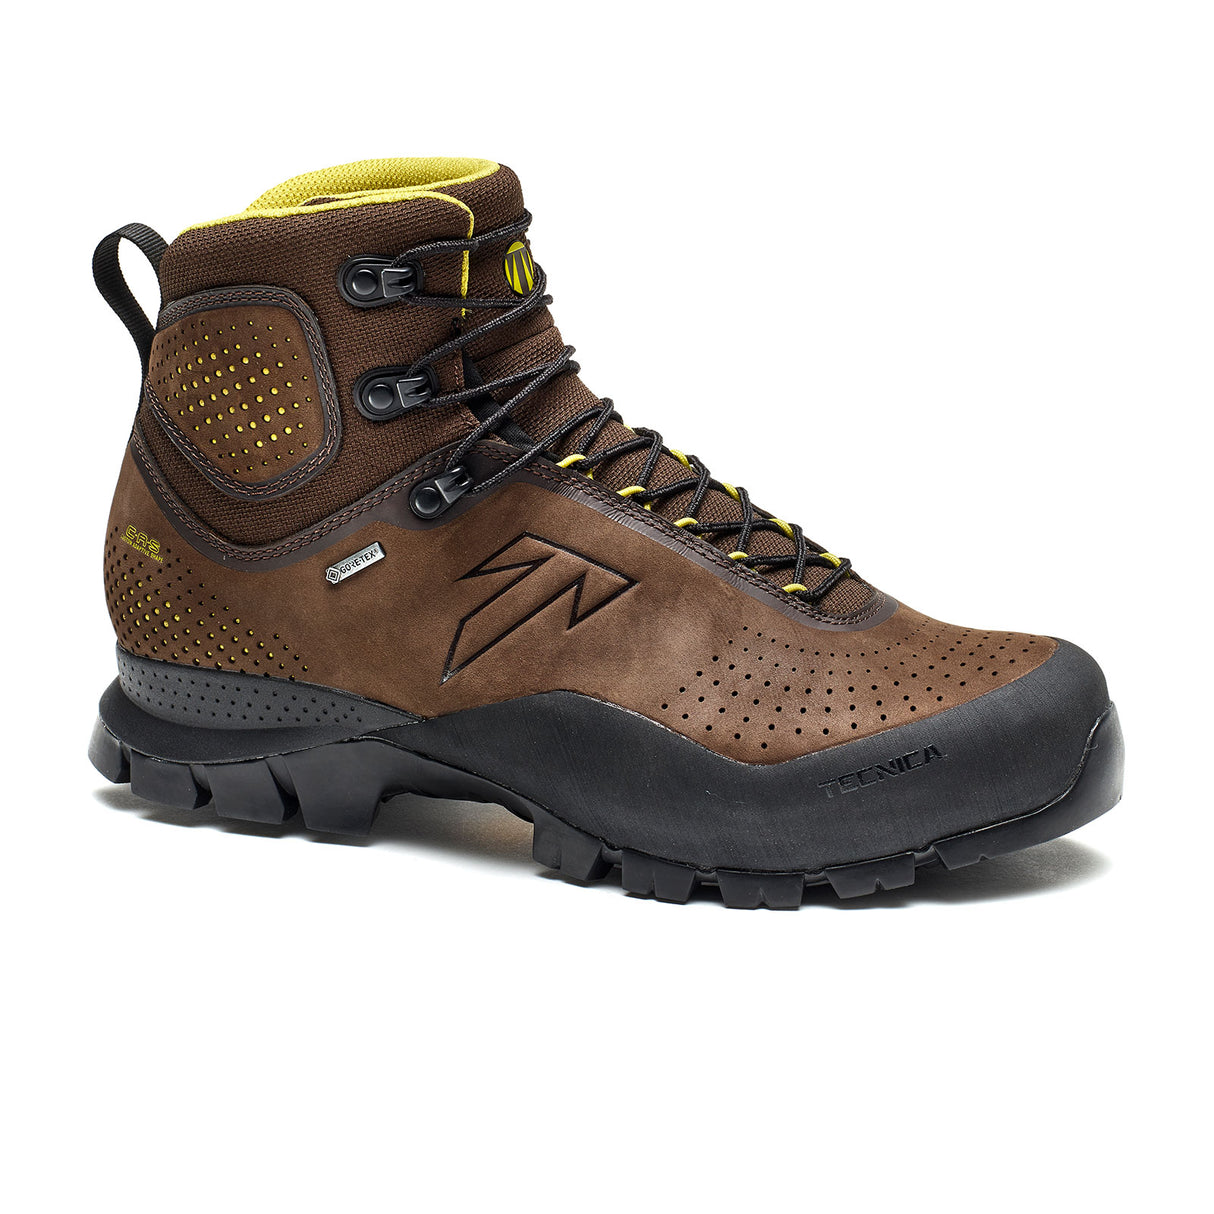 Tecnica Forge GTX Mid Hiking Boot (Men) - Coffee/Green Boots - Hiking - Mid - The Heel Shoe Fitters